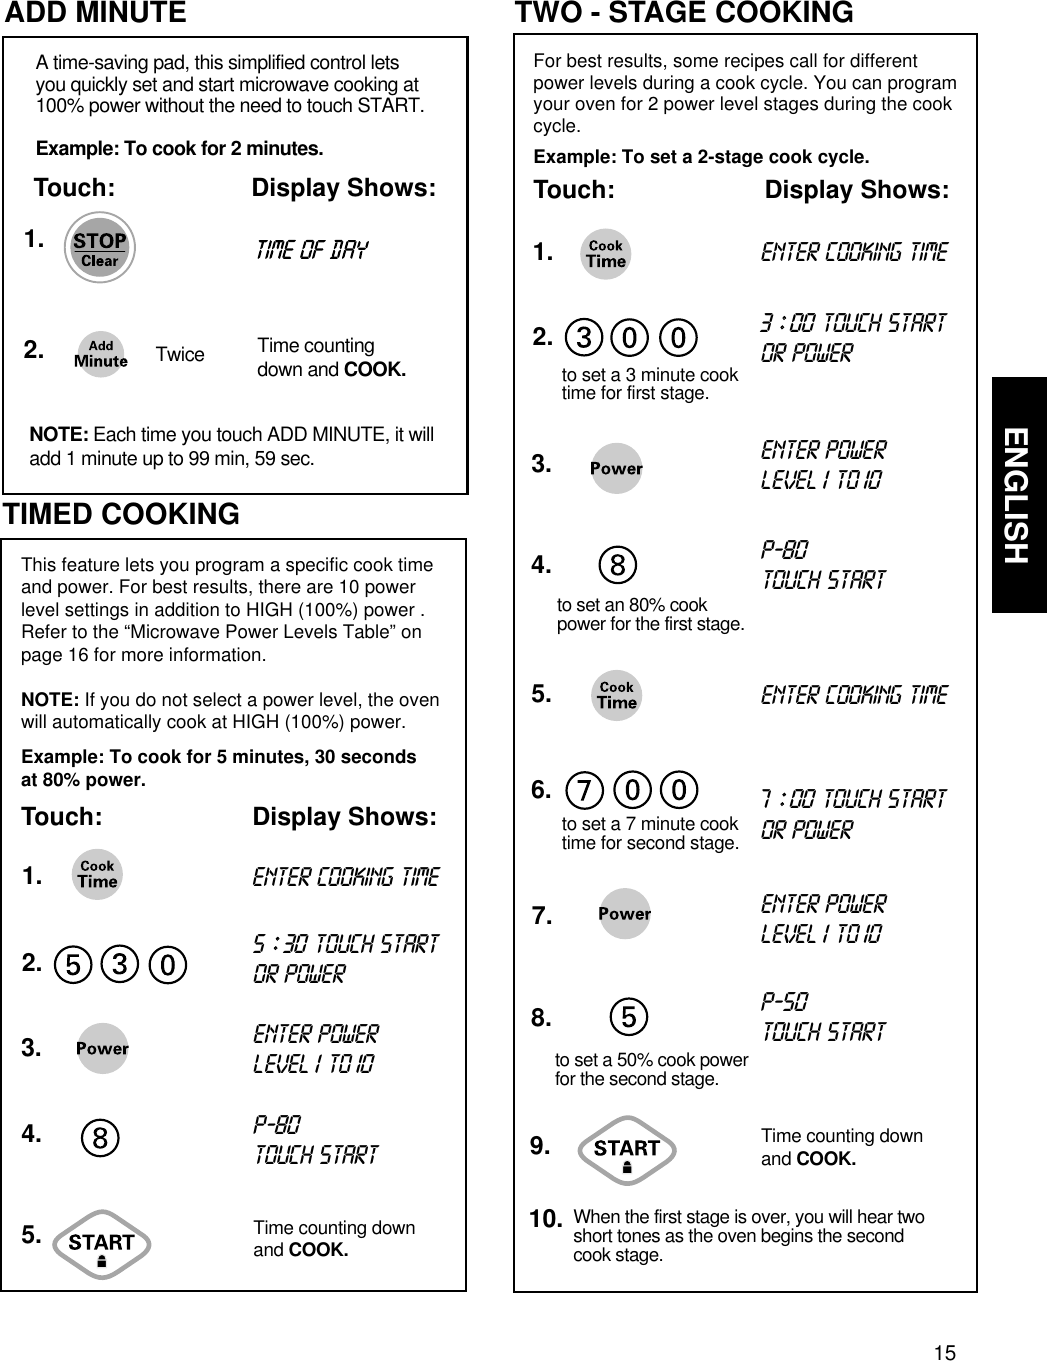 15ENGLISHUSING YOUR MICROWAVE OVEN  TIMED COOKING1.2.5.3.4.This feature lets you program a specific cook timeand power. For best results, there are 10 powerlevel settings in addition to HIGH (100%) power .Refer to the “Microwave Power Levels Table” onpage 16 for more information.NOTE: If you do not select a power level, the ovenwill automatically cook at HIGH (100%) power.Example: To cook for 5 minutes, 30 secondsat 80% power.Touch: Display Shows:ENTER COOKING TIME5 ::30TOUCH STARTOR POWERENTER POWER LEVEL1 TO 10P-80TOUCH STARTTime counting downand COOK.For best results, some recipes call for differentpower levels during a cook cycle. You can programyour oven for 2 power level stages during the cookcycle.Example: To set a 2-stage cook cycle.Touch: Display Shows:TWO - STAGE COOKING1.2.5.3.4.6.to set a 7 minute cook time for second stage.to set a 3 minute cook time for first stage.7.9.ENTER COOKING TIMEENTER COOKING TIME3 ::00TOUCH STARTOR POWER7 ::00TOUCH STARTOR POWERENTER POWER LEVEL 1 TO10ENTER POWER LEVEL 1 TO10P-80TOUCH START8.to set a 50% cook powerfor the second stage.to set an 80% cookpower for the first stage.P-50TOUCH STARTWhen the first stage is over, you will hear twoshort tones as the oven begins the secondcook stage.10.Time counting downand COOK.ADD MINUTE1.2.A time-saving pad, this simplified control letsyou quickly set and start microwave cooking at100% power without the need to touch START.Example: To cook for 2 minutes.Touch: Display Shows:NOTE: Each time you touch ADD MINUTE, it willadd 1 minute up to 99 min, 59 sec.Twice Time countingdown and COOK.